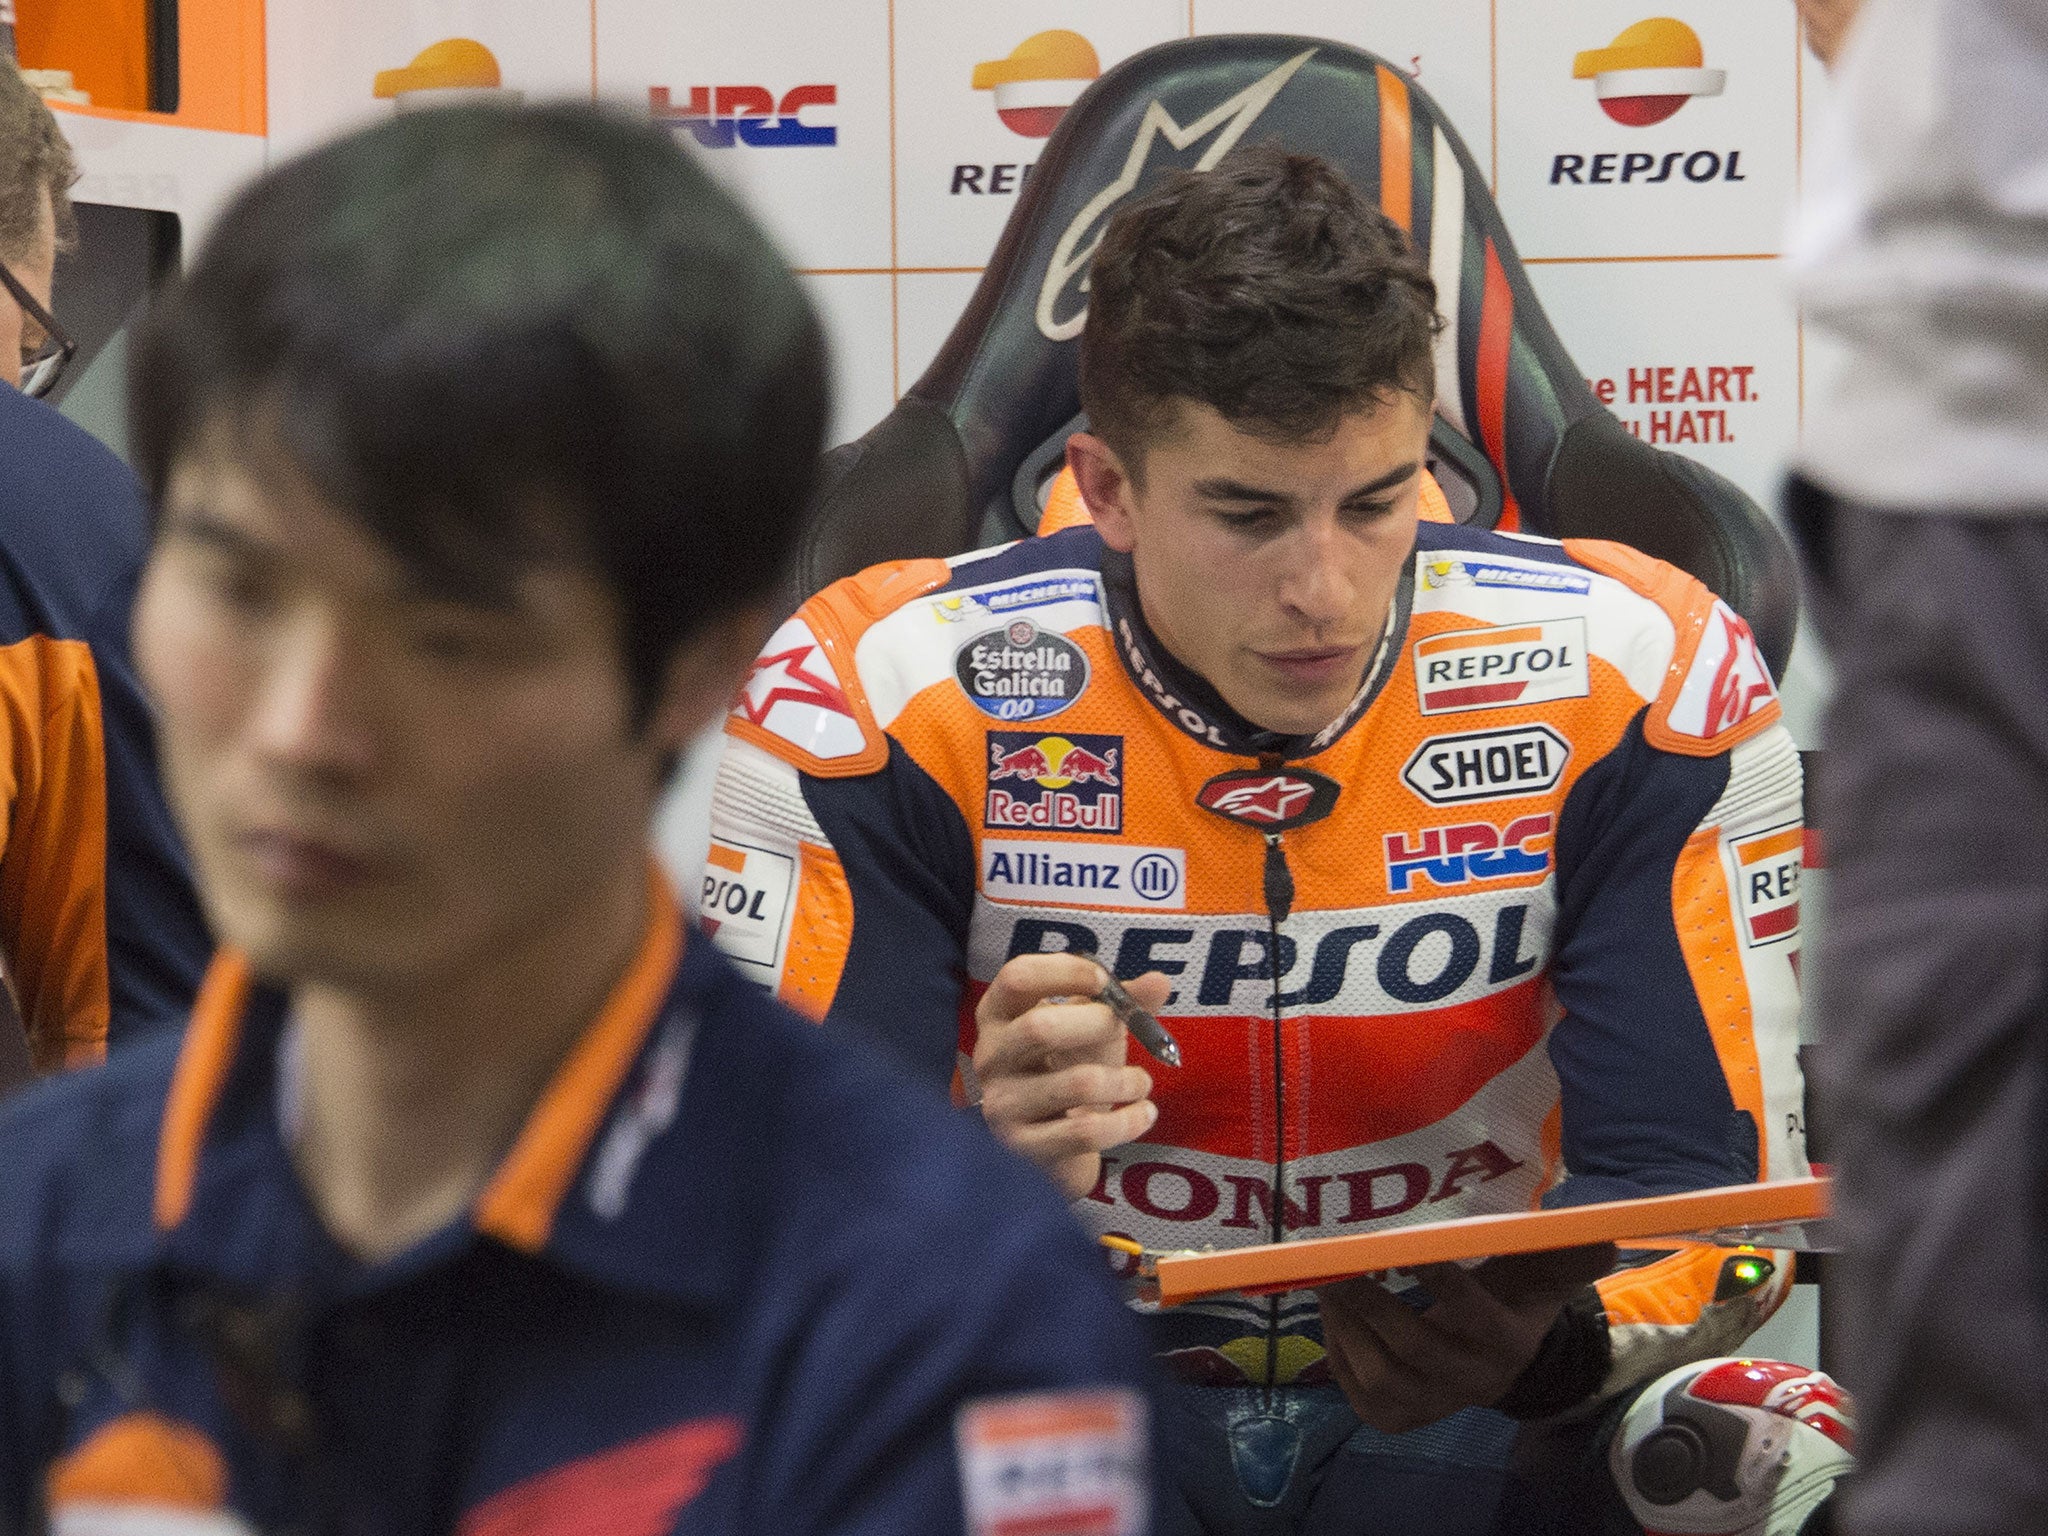 Marquez is bidding to win a fourth MotoGP world championship this year